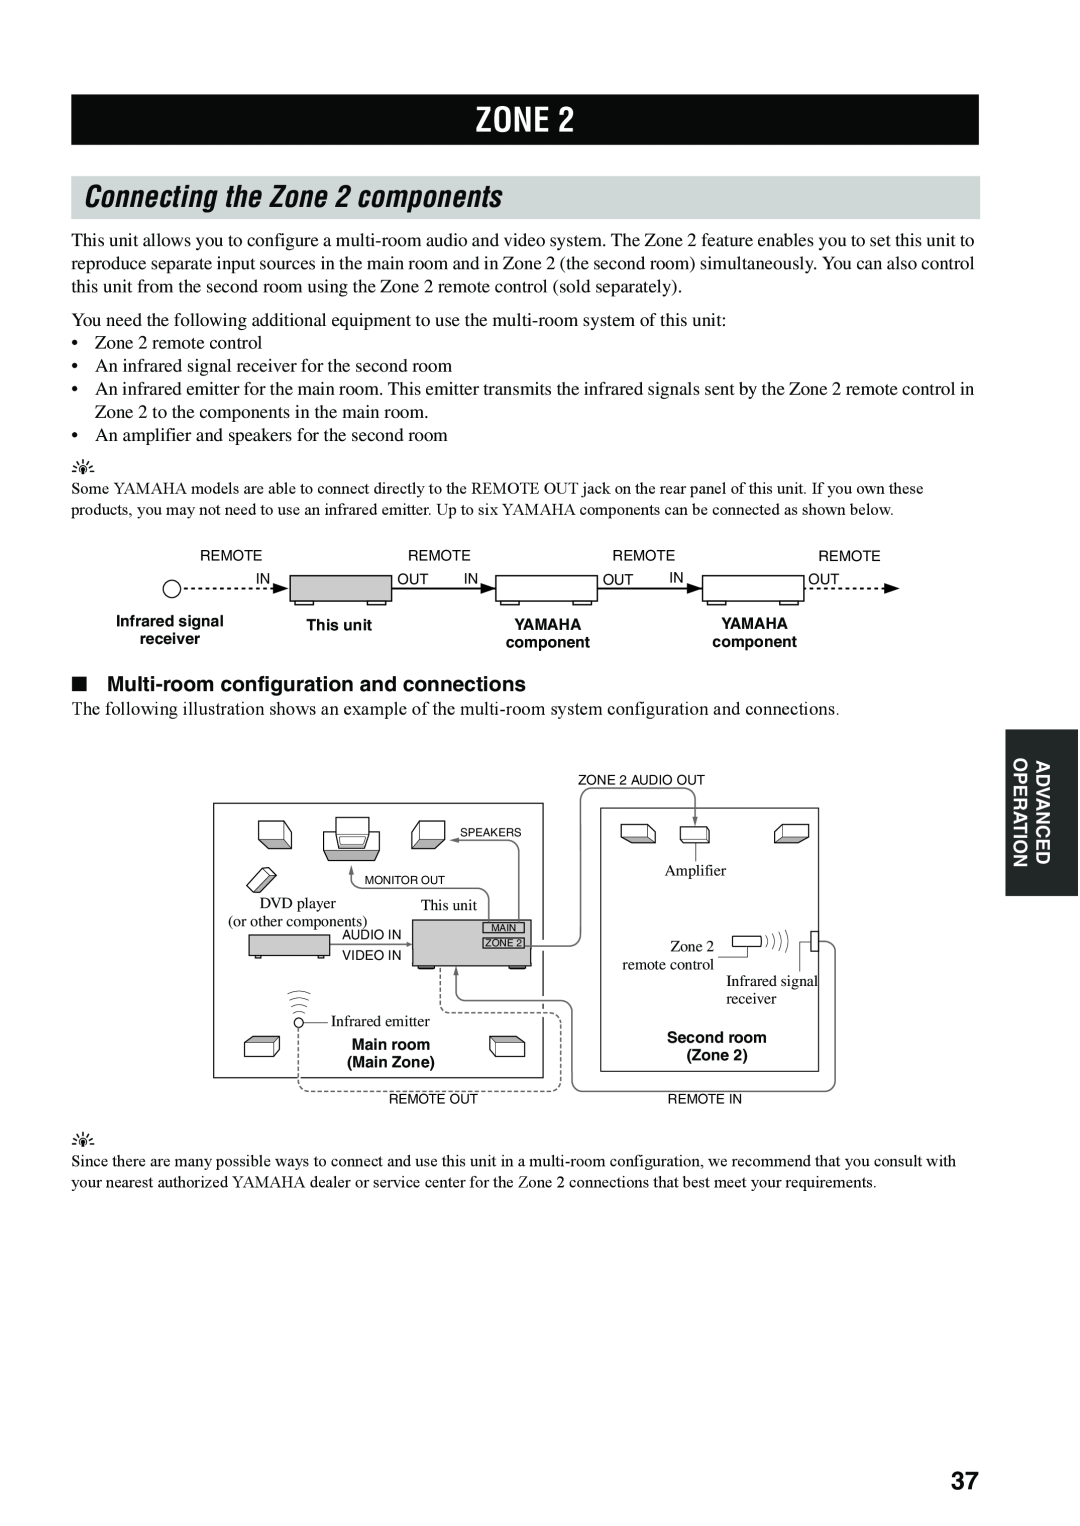 Yamaha RX-497 owner manual Connecting the Zone 2 components, Multi-roomconfiguration and connections 